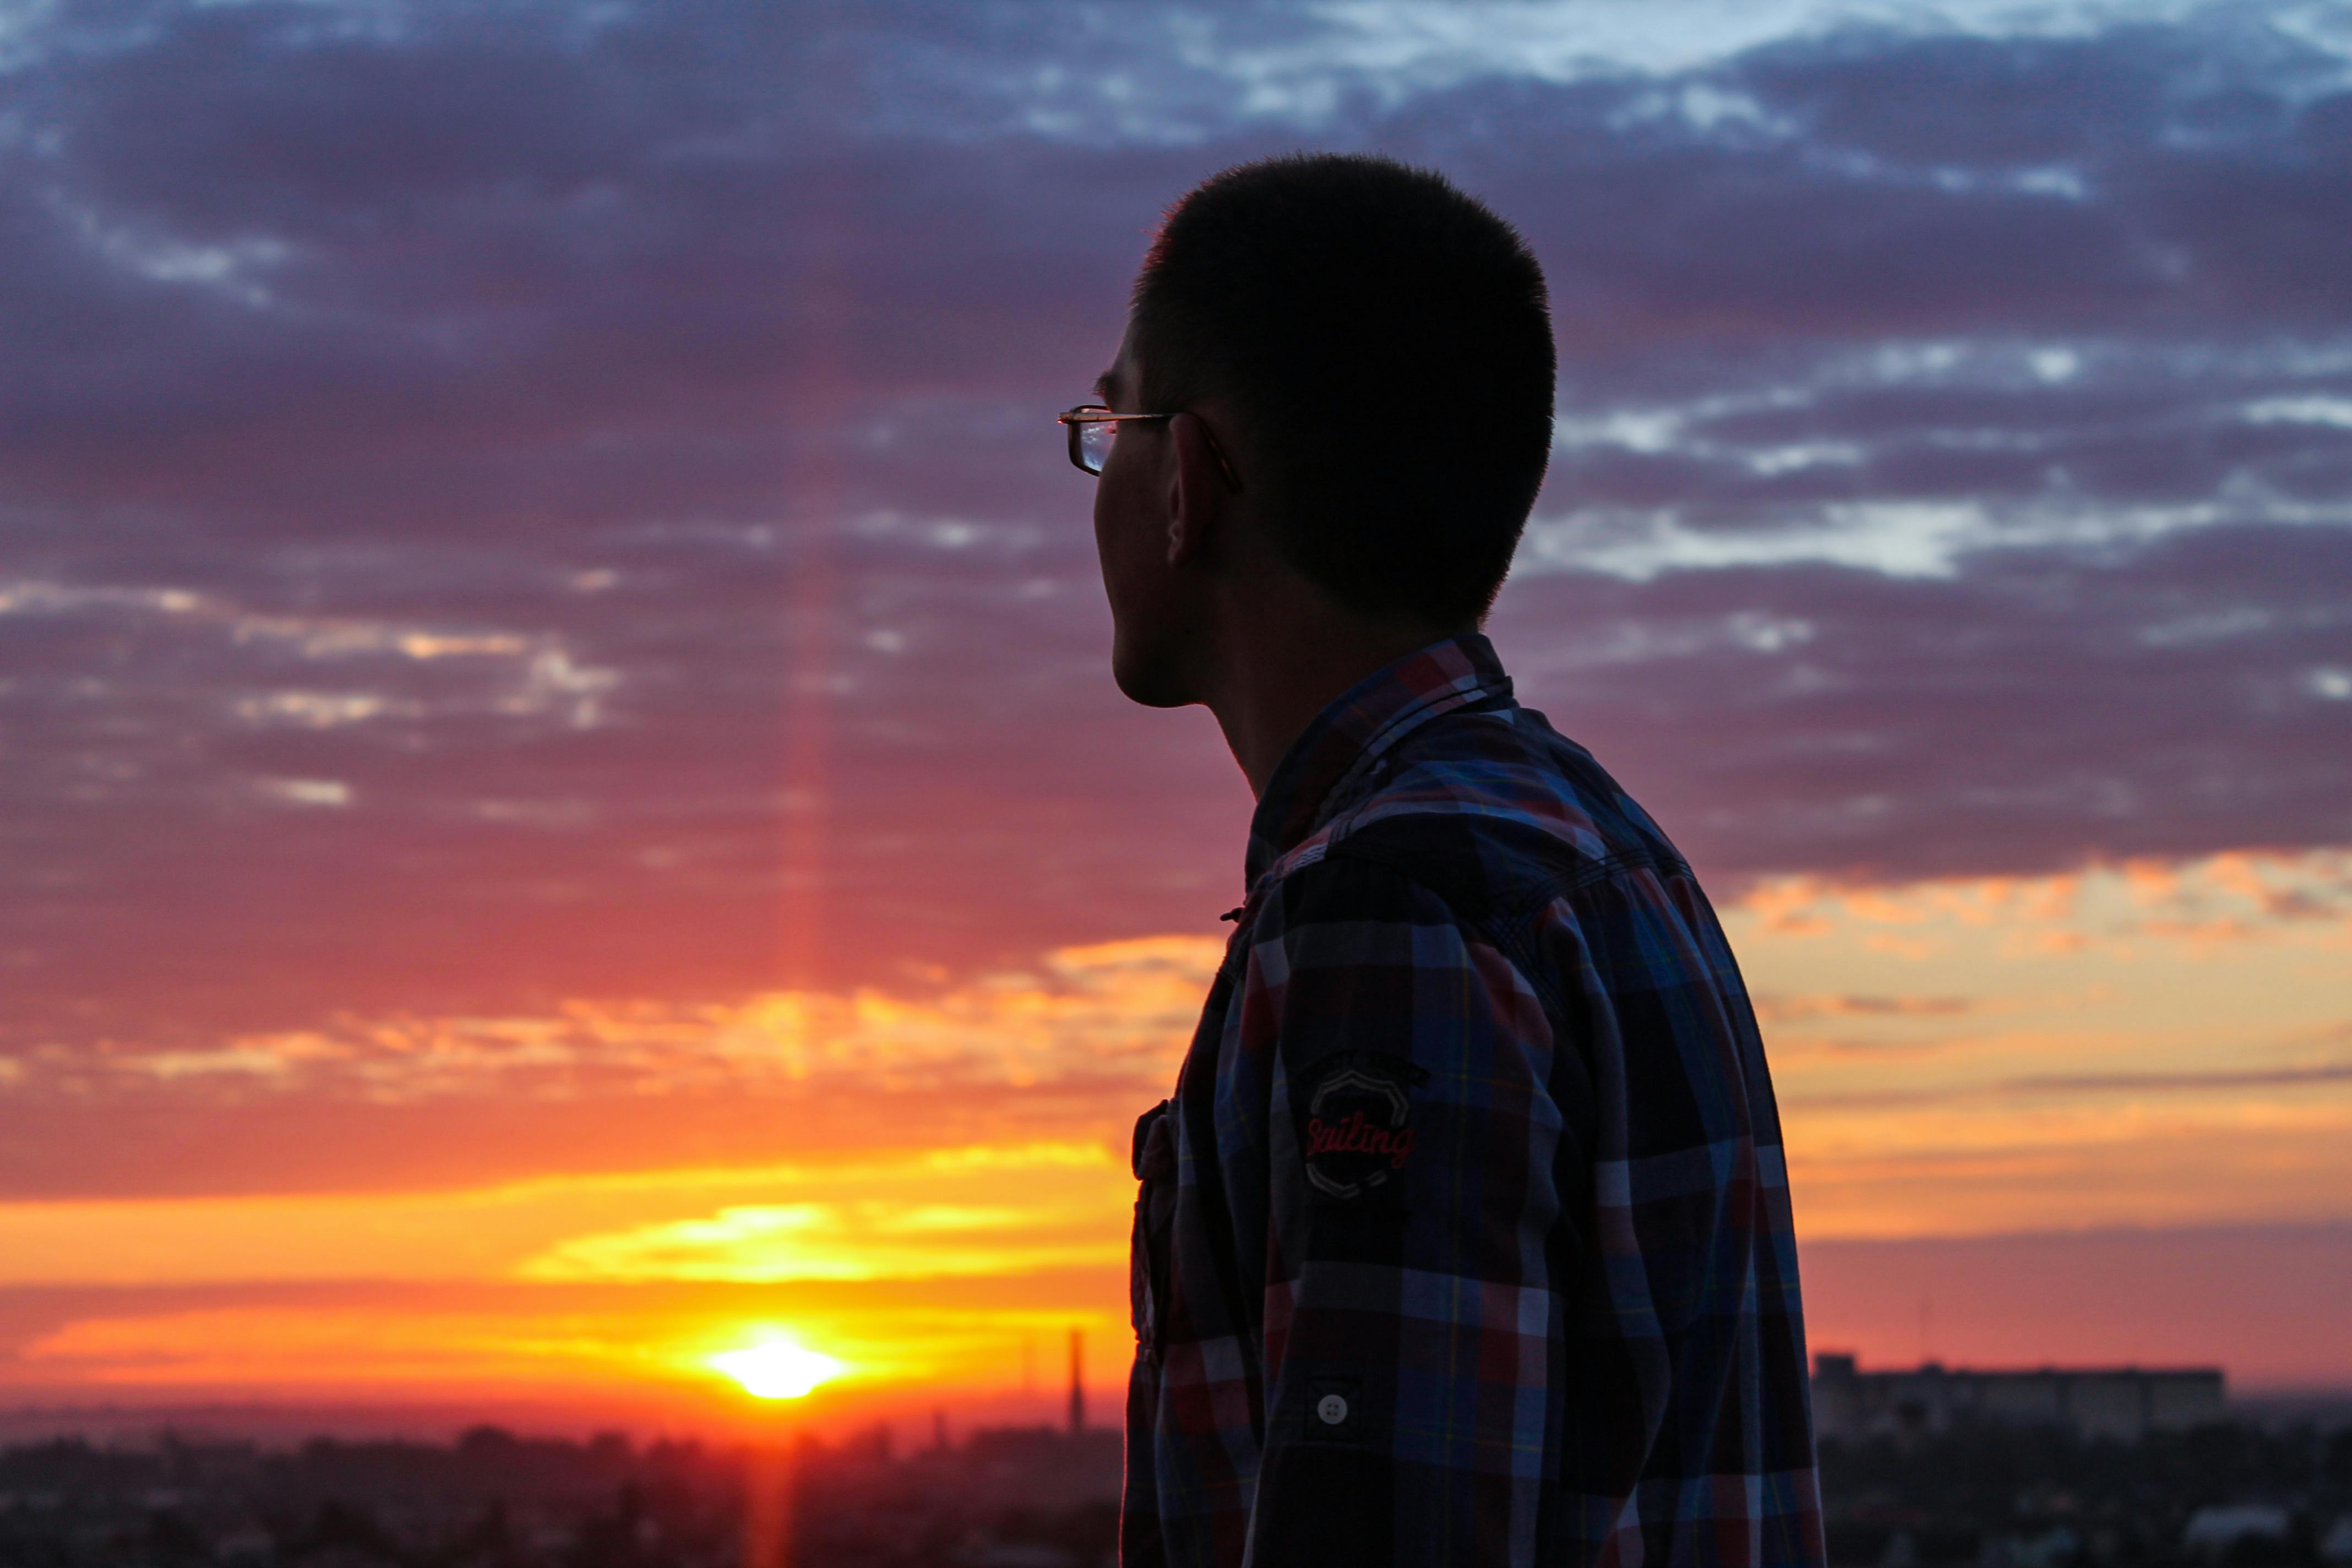 Free stock photo of A guy looking at sun rising up